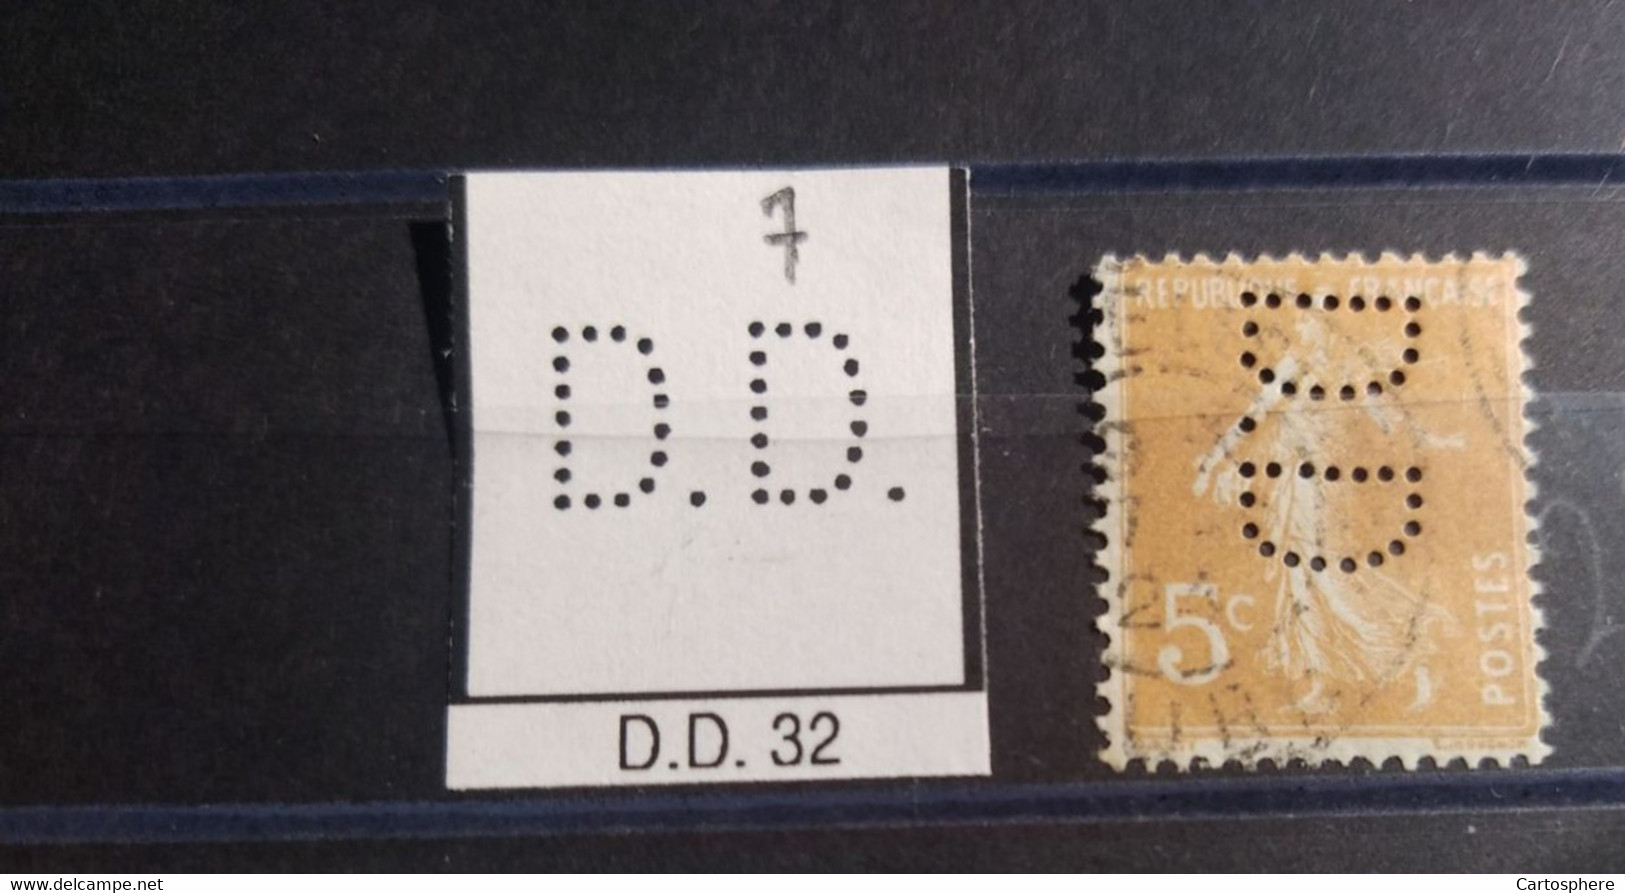 FRANCE D.D 32 TIMBRE DD32 INDICE 5  SEMEUSE PERFORE PERFORES PERFIN PERFINS PERFO PERFORATION PERFORIERT - Used Stamps